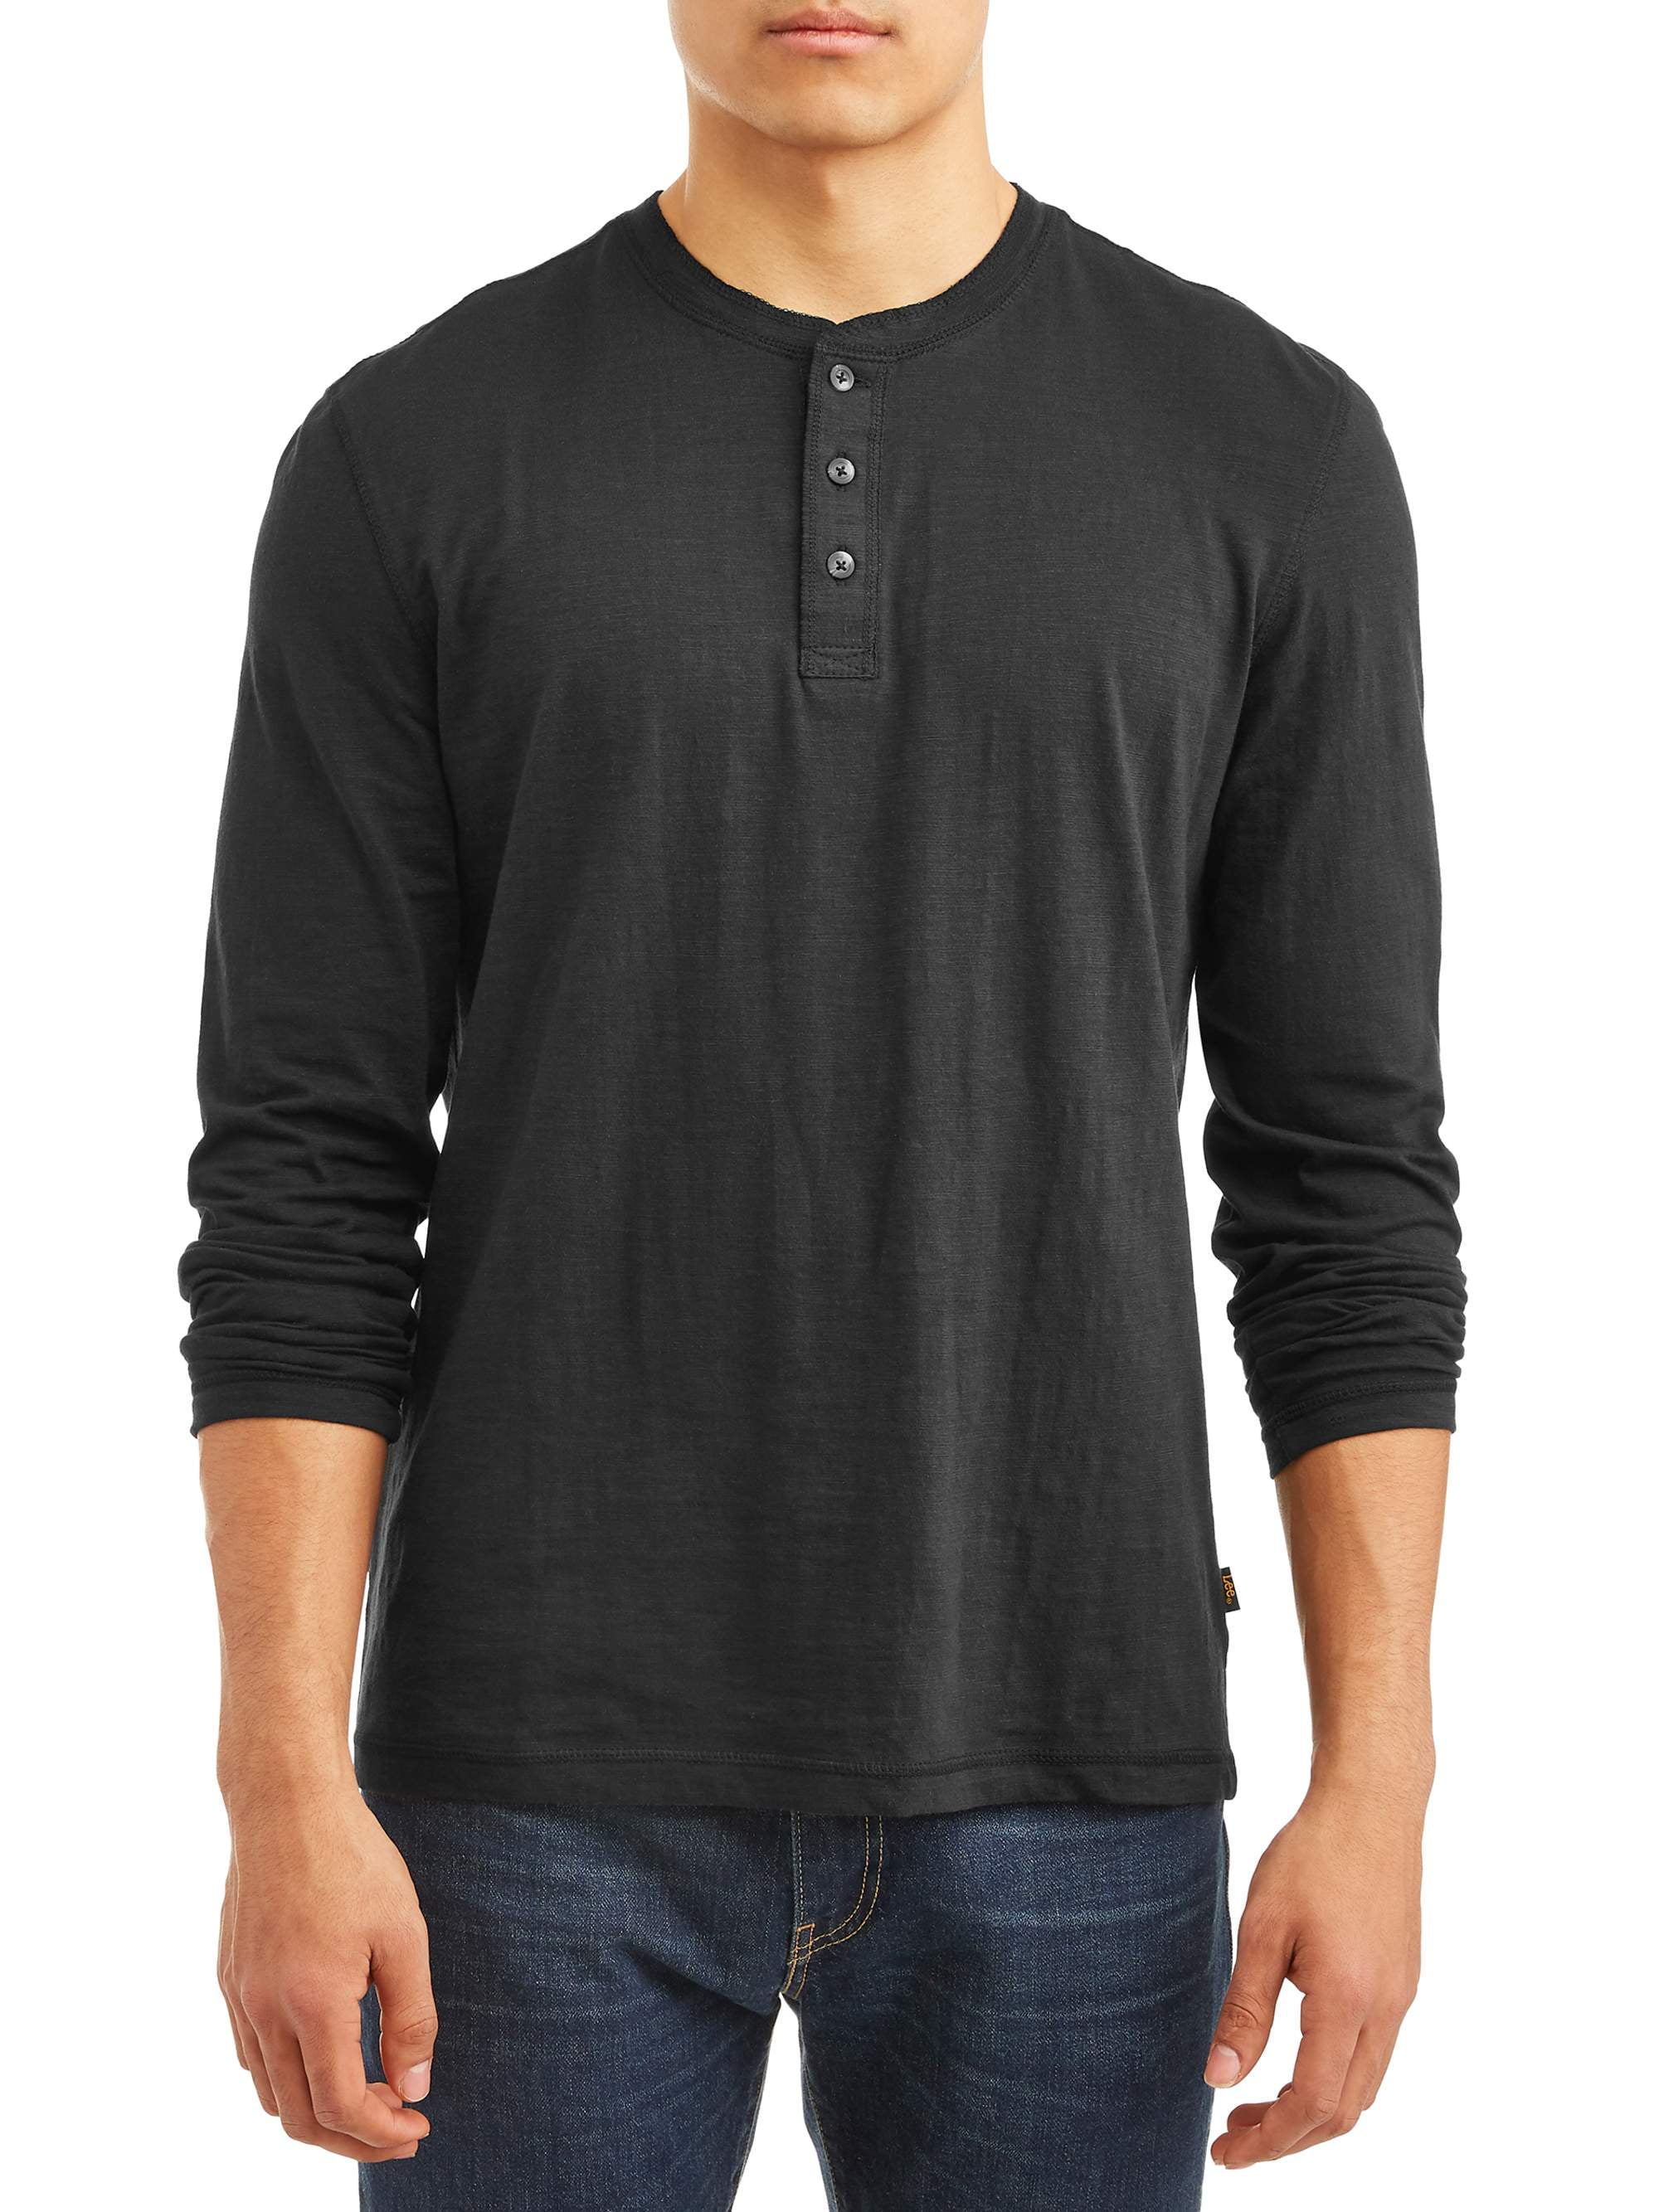 Men's Long Sleeve Textured Slub Core Henley, Available up to size XL ...